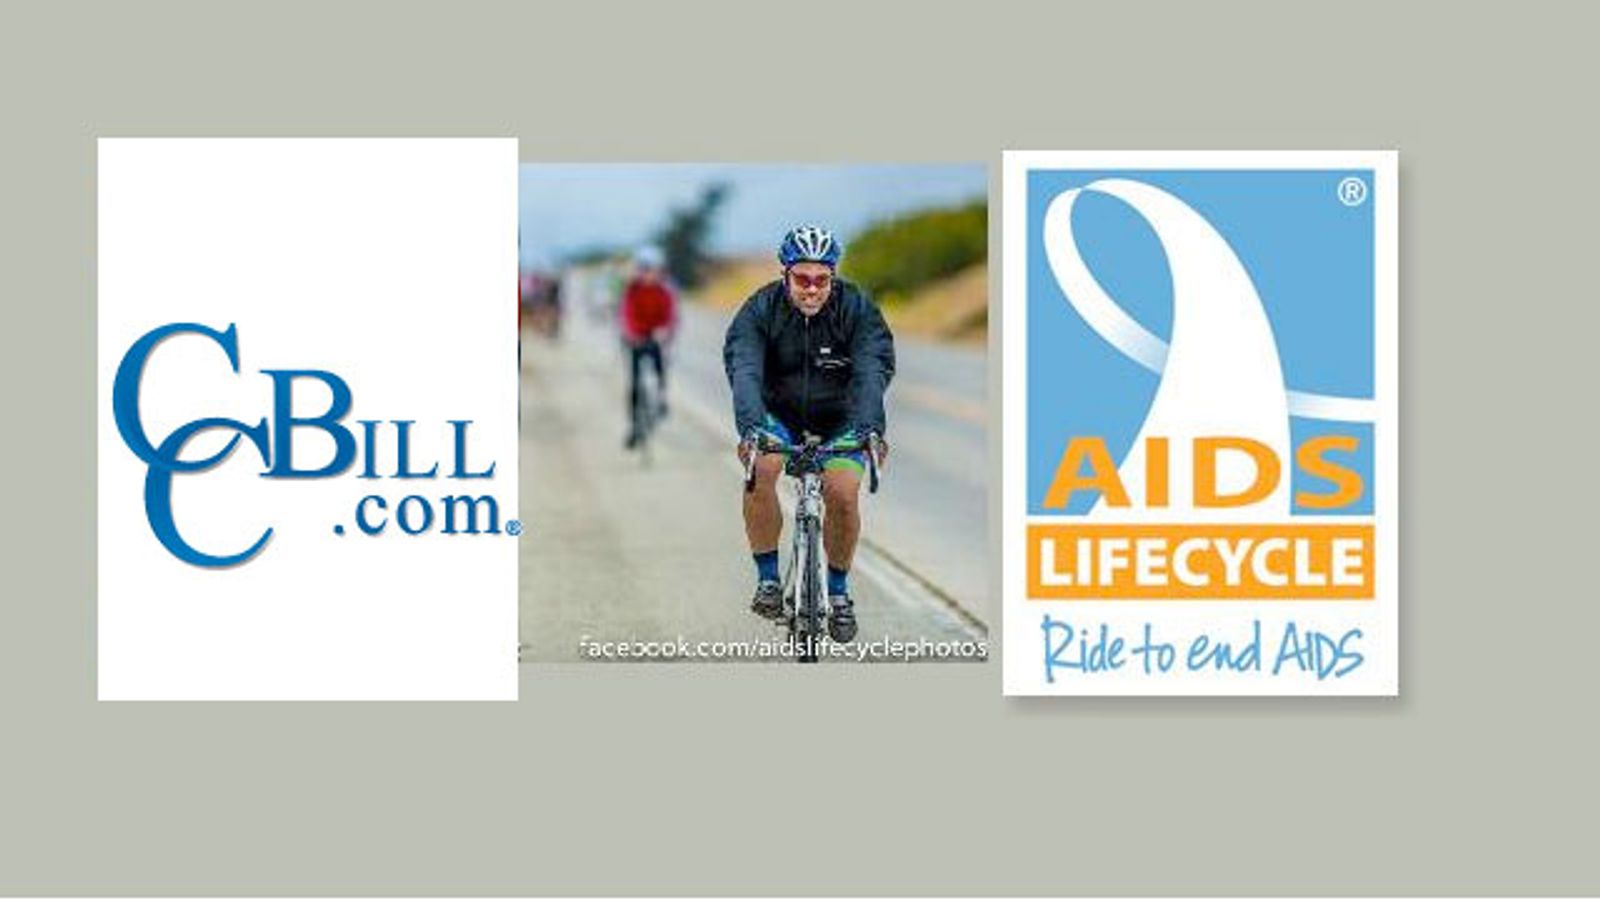 CCBill Lends Its Support to AIDS/LifeCycle 2015 Ride